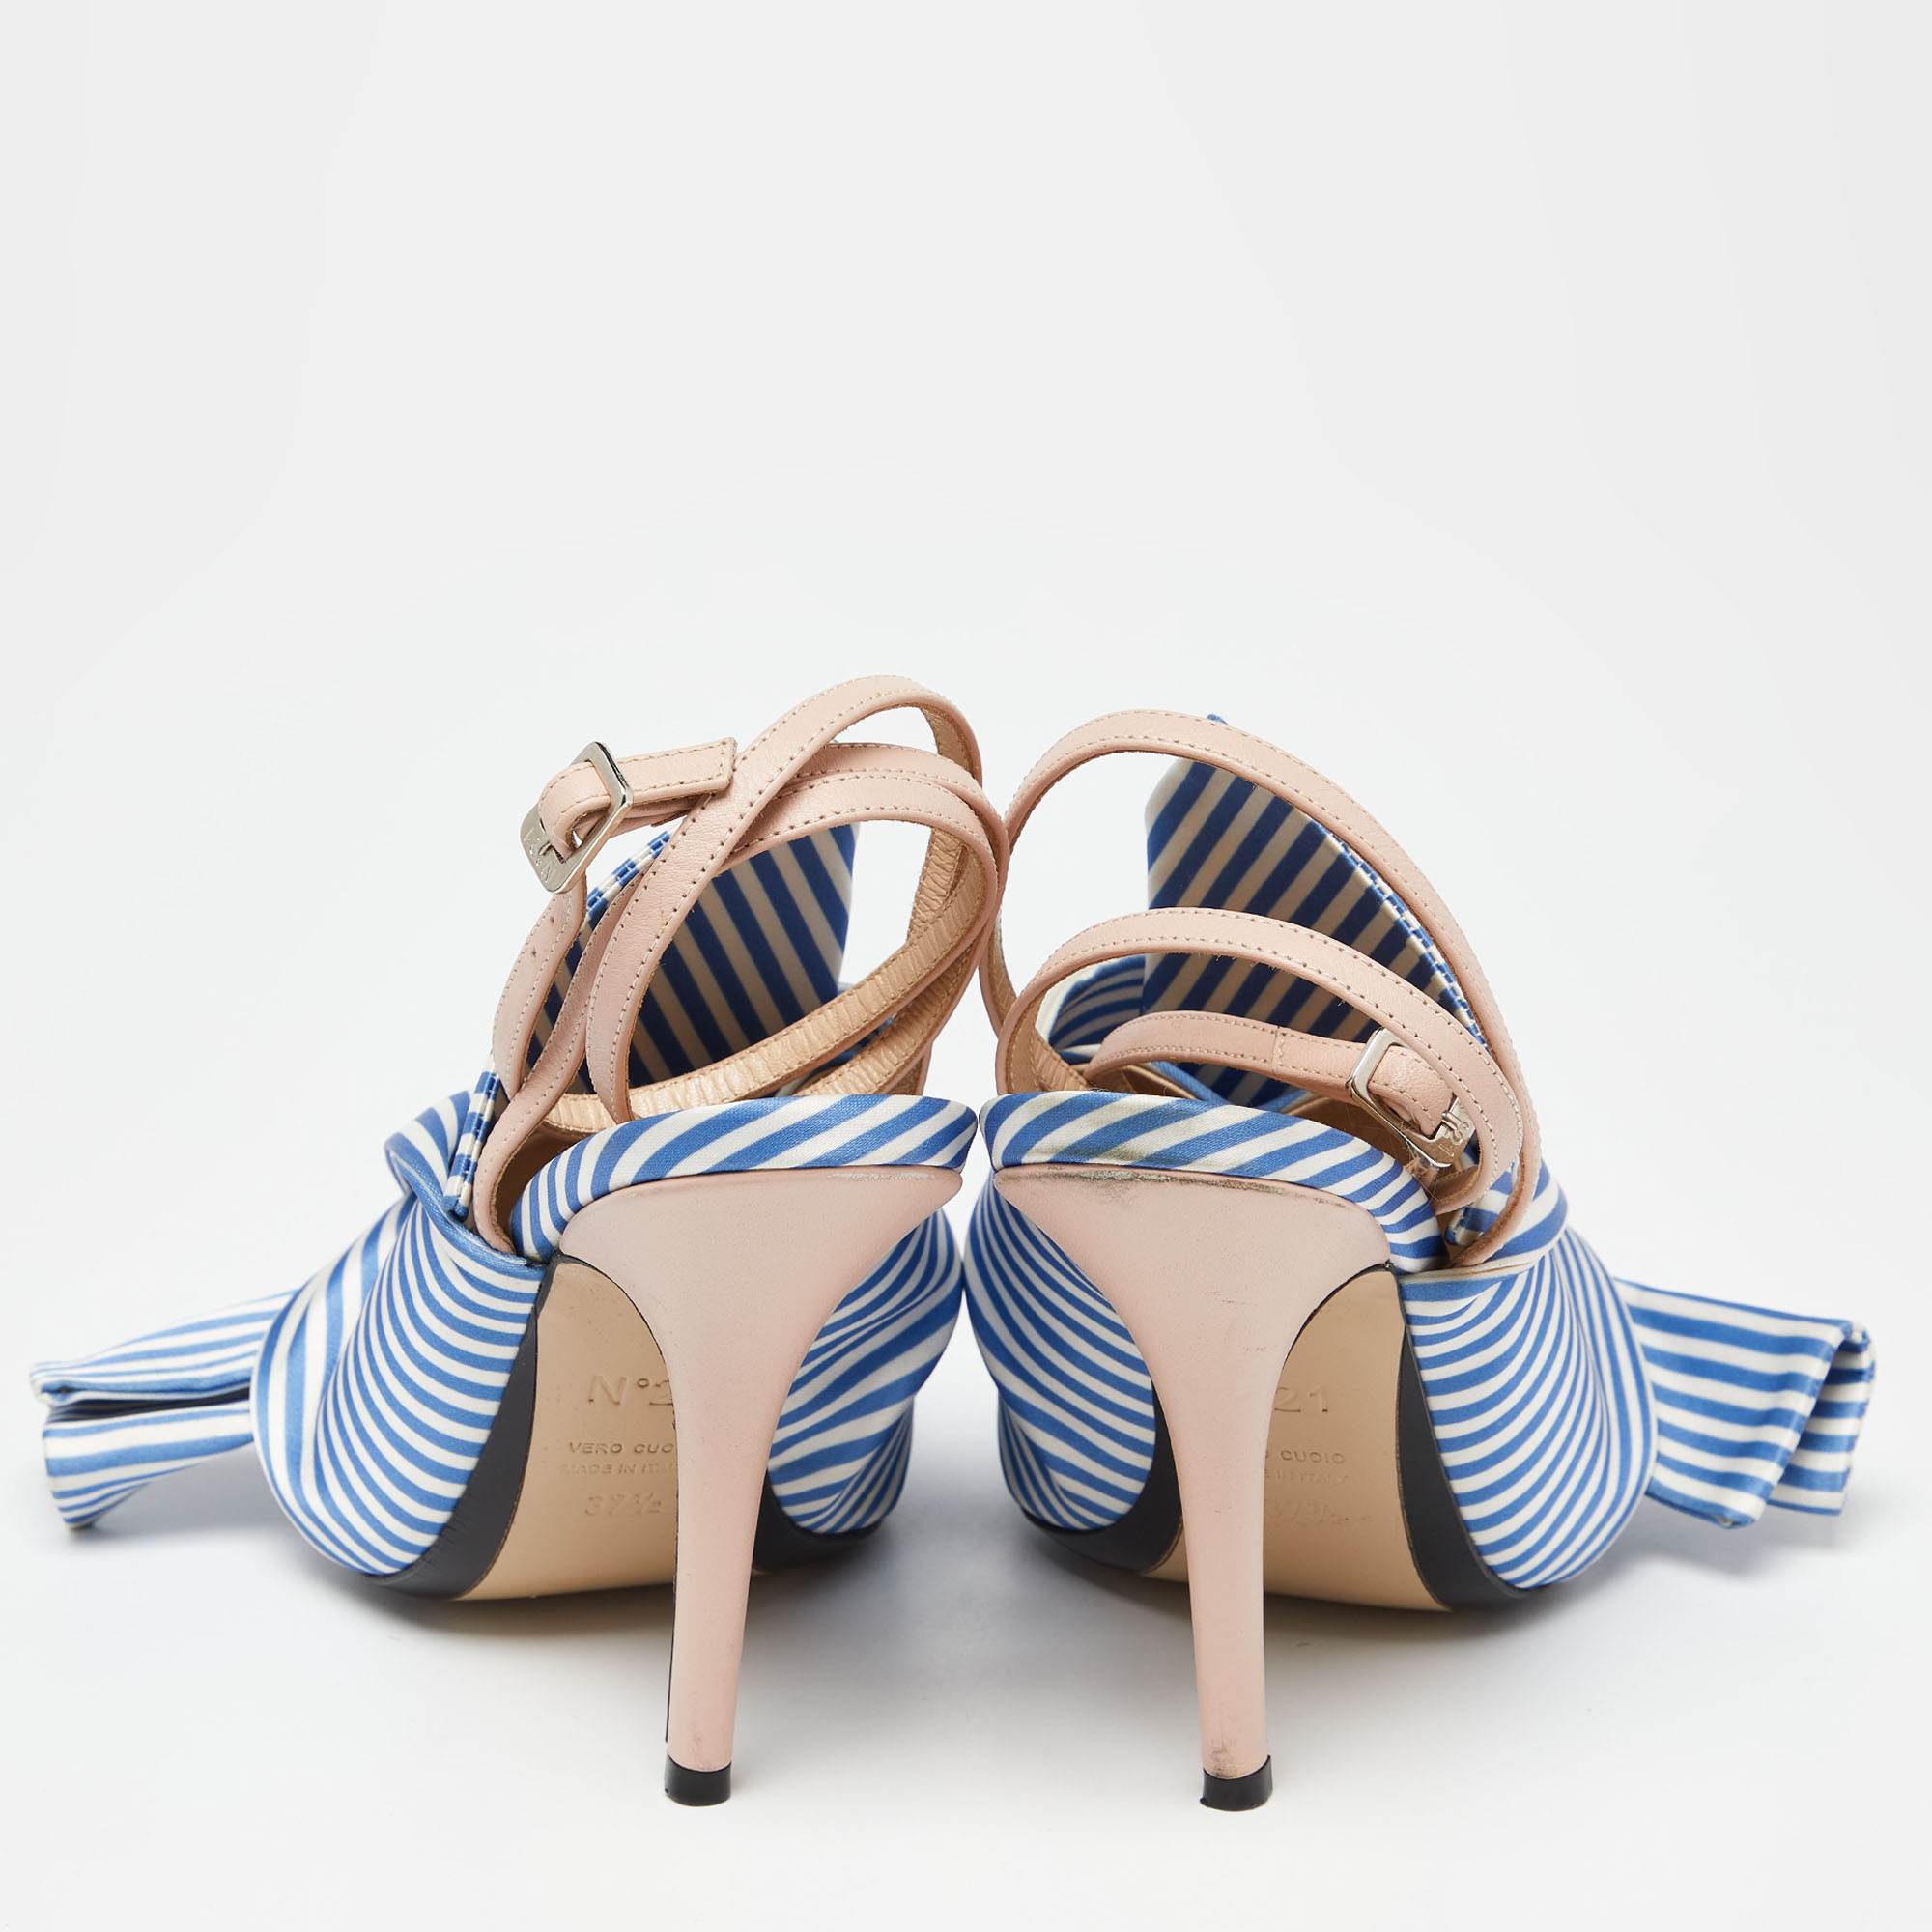 N21 Tricolor Striped Satin And Leather Knotted Ankle Strap Sandals Size 37.5